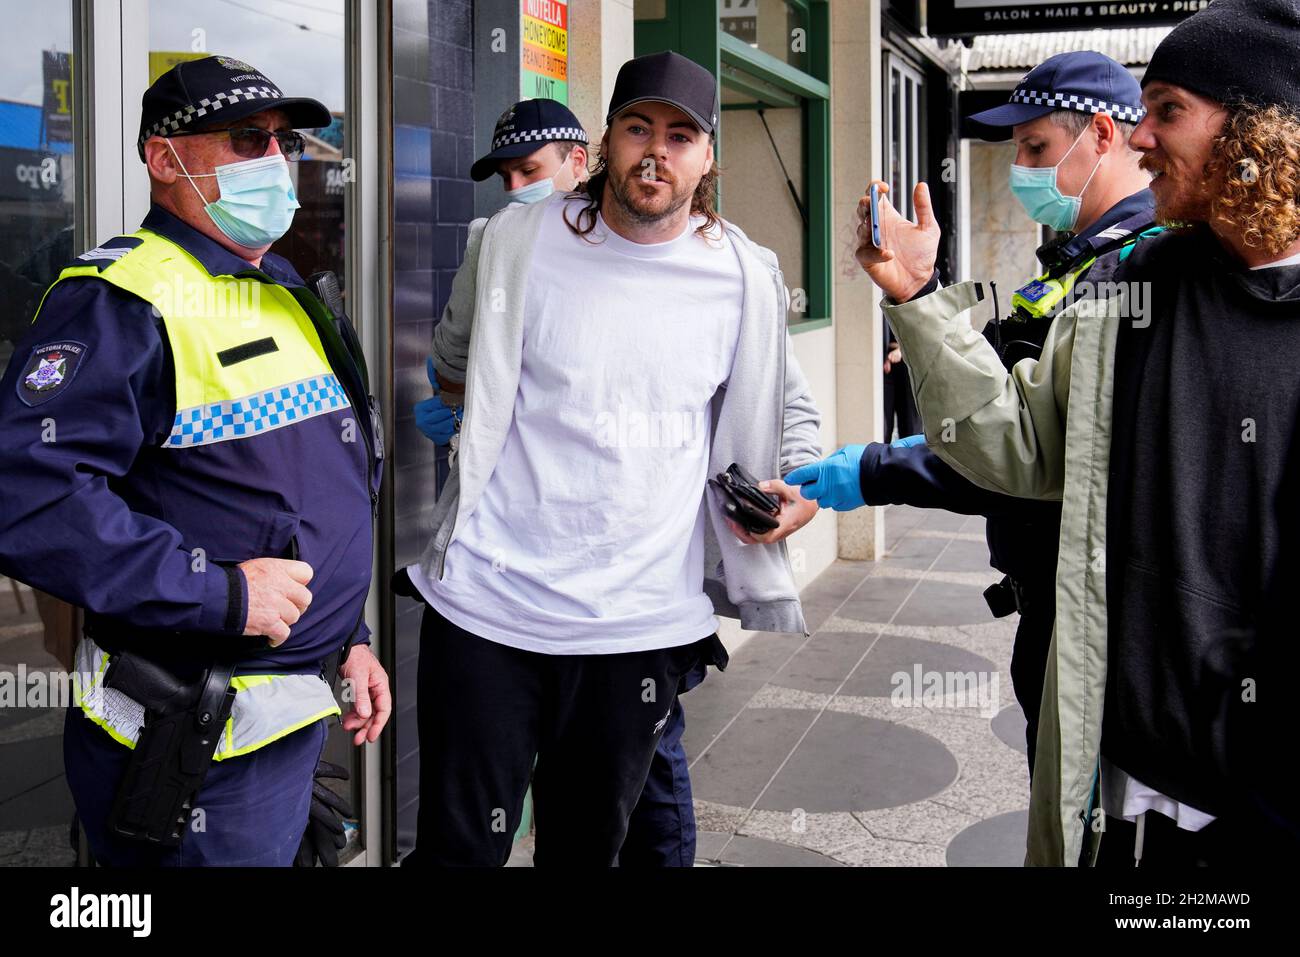 Police officers handcuff a man at a Victorian Freedom Movement protest on  the second day of eased coronavirus disease (COVID-19) regulations,  following a lockdown to curb an outbreak, in Melbourne, Australia, October